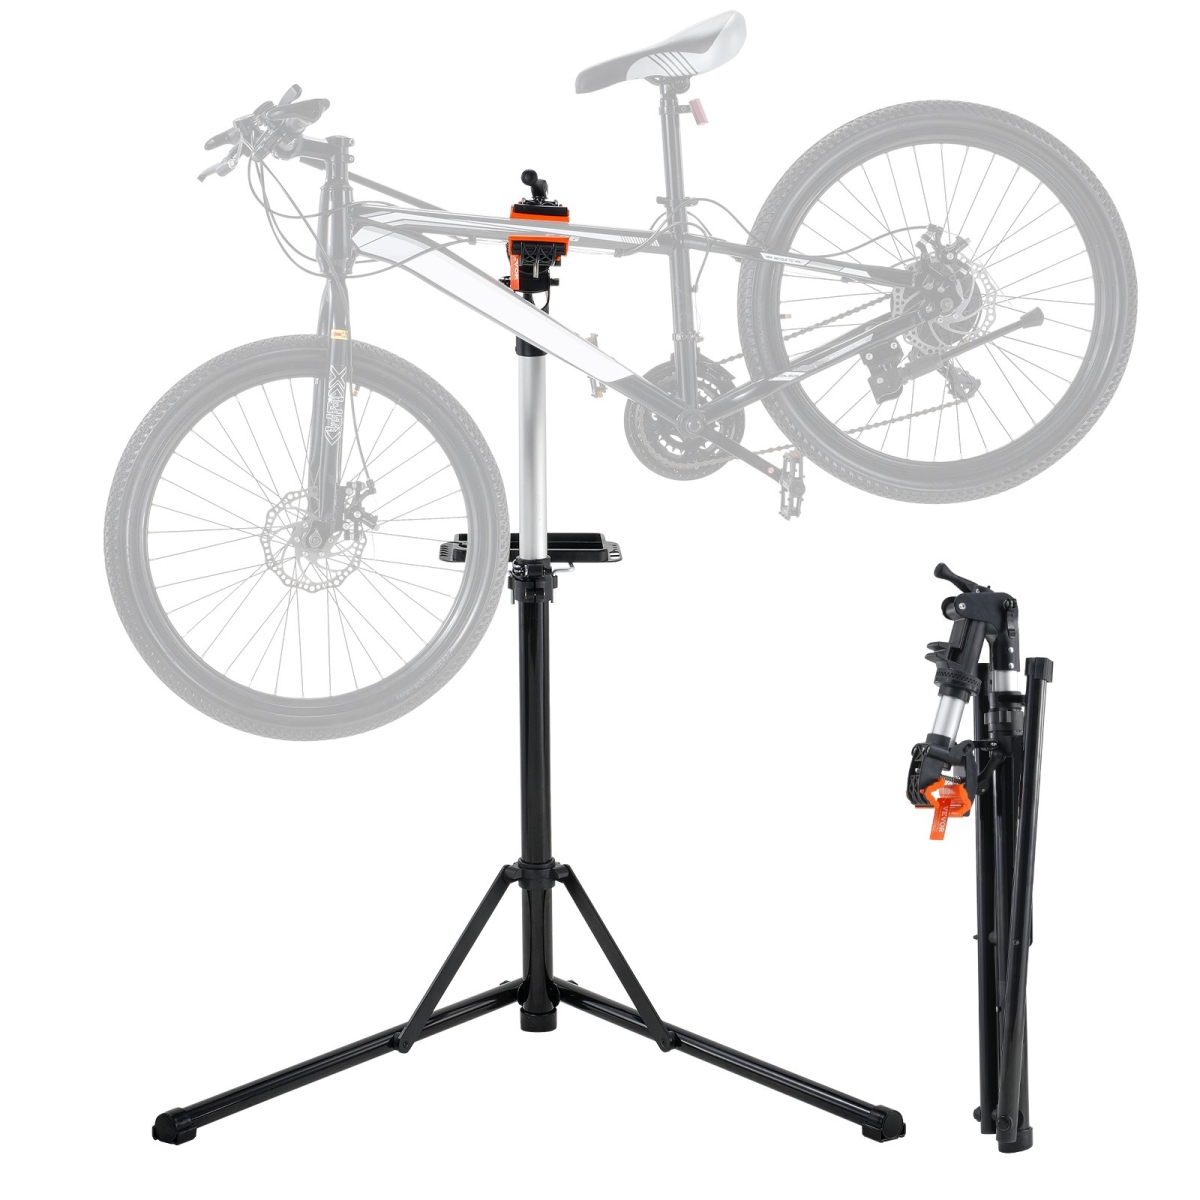 Picture of Vevor ZXCWXZJLZLDSEXSGUV0 Bike Repair Stand&#44; Heavy-Duty Aluminum Bicycle Repair Stand&#44; Adjustable Height Bike Maintenance Workstand with Magnetic Tool Tray Telescopic Arm - 66 lbs